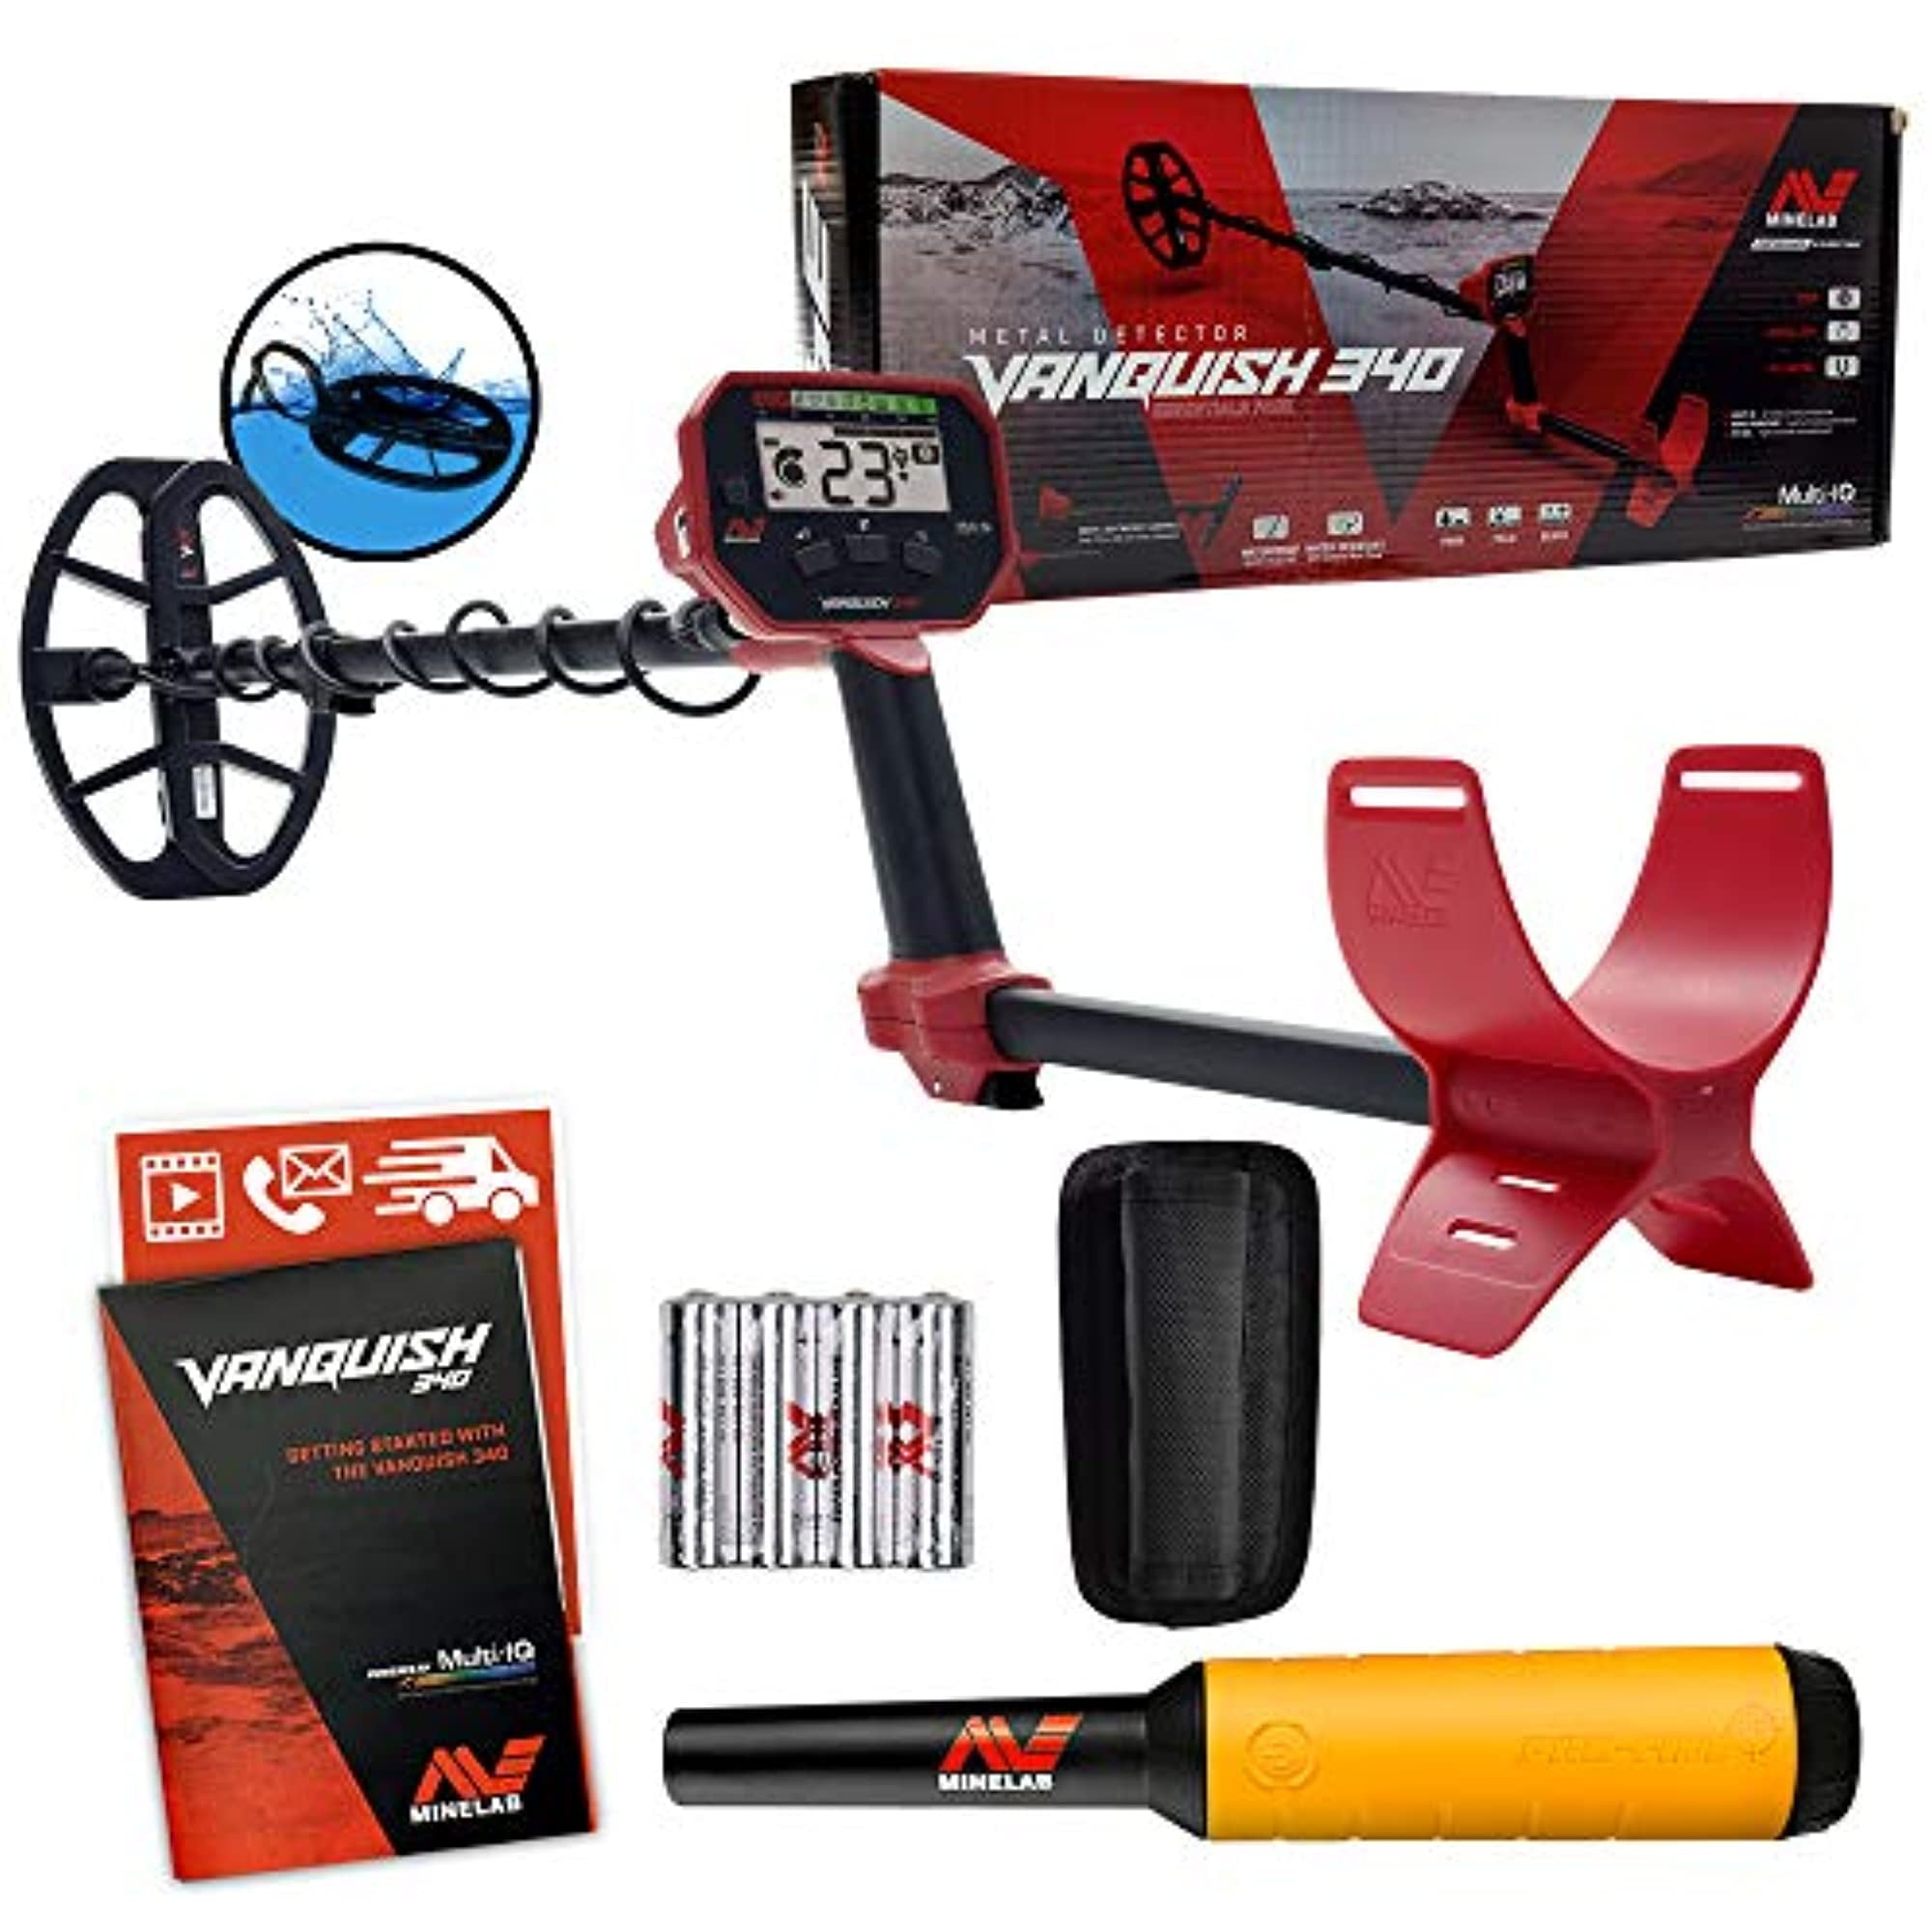 Minelab Vanquish 340 Detector with 10 x 7 Coil and Pro-Find 20 Pinpointer -  Walmart.com